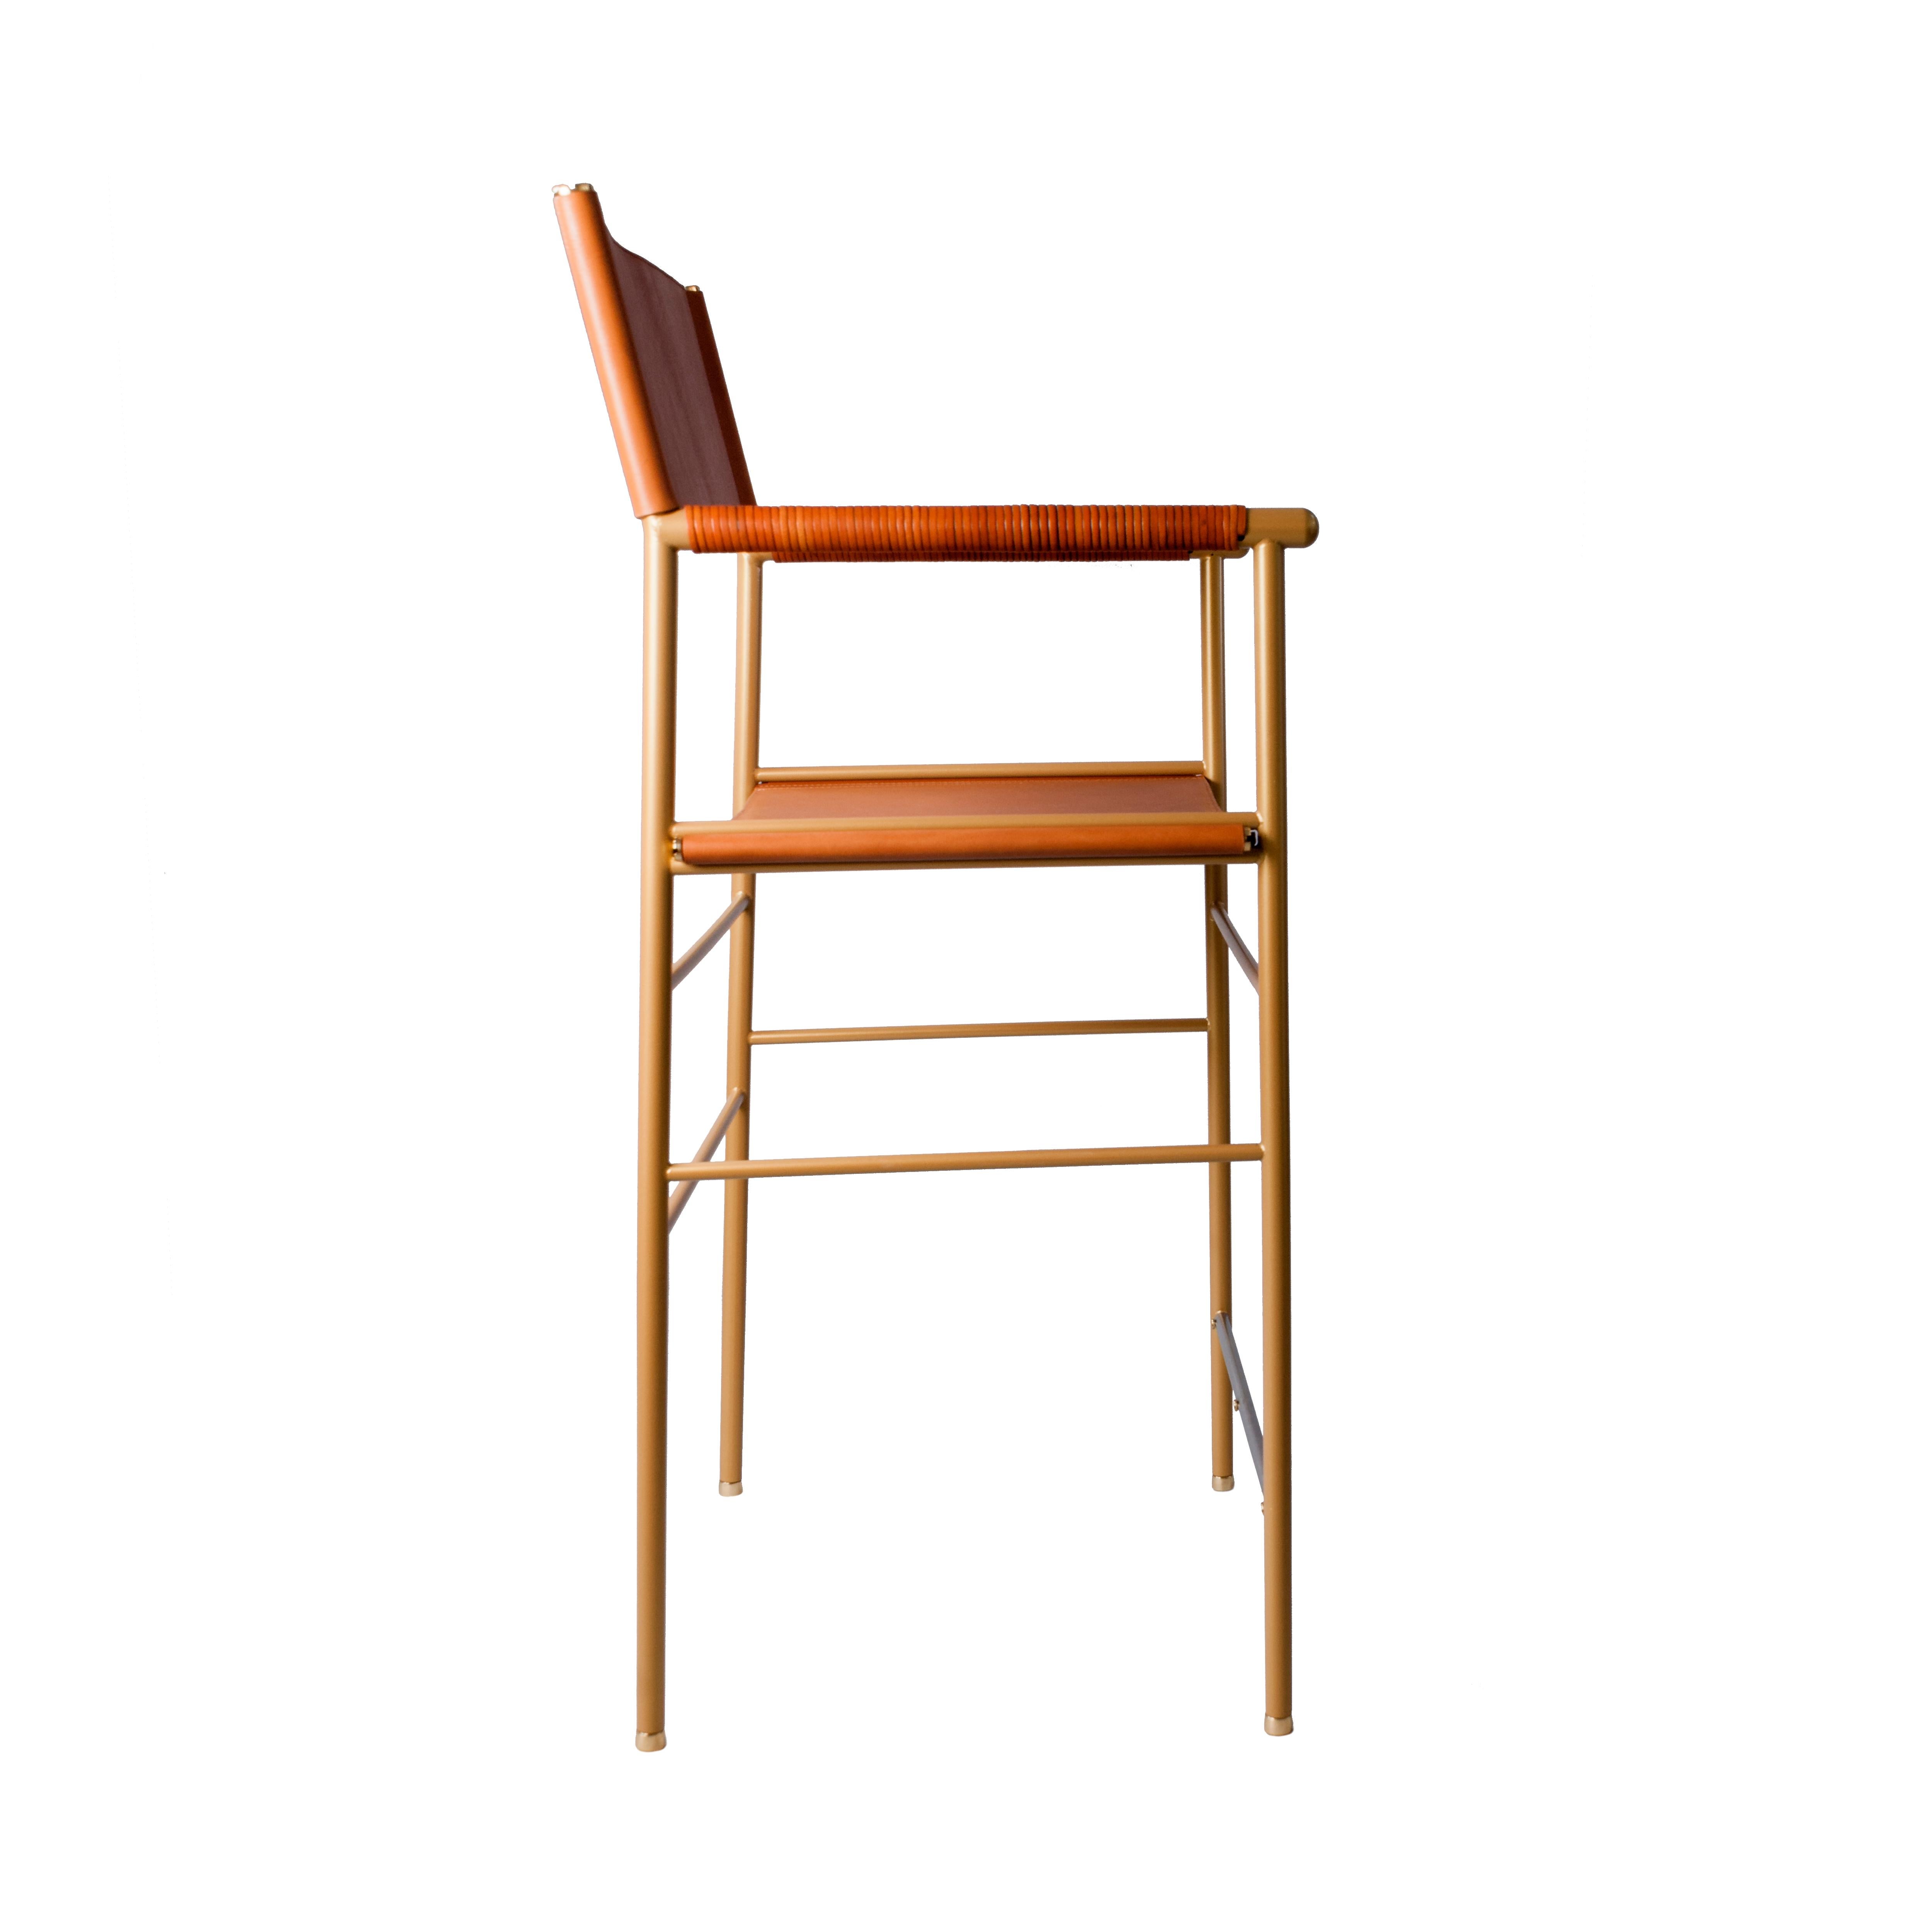 Modern Pair Counter Bar Stool w. Backrest - Tan Leather & Aged Brass Powder Coated For Sale